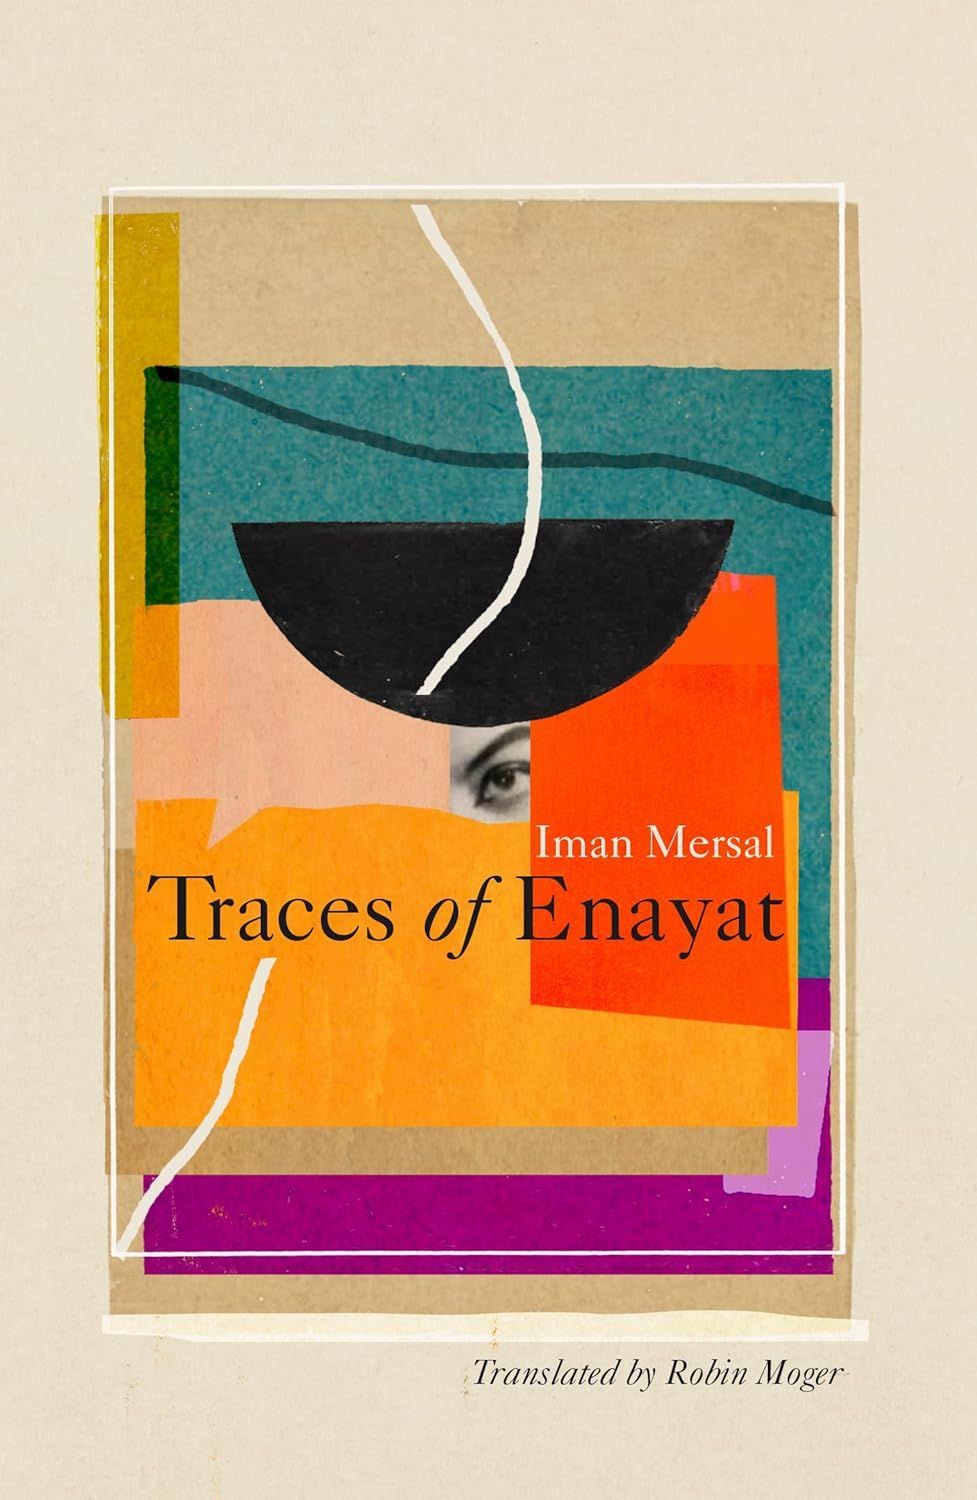 The Nihilism of the Archive: On Iman Mersal’s “Traces of Enayat”